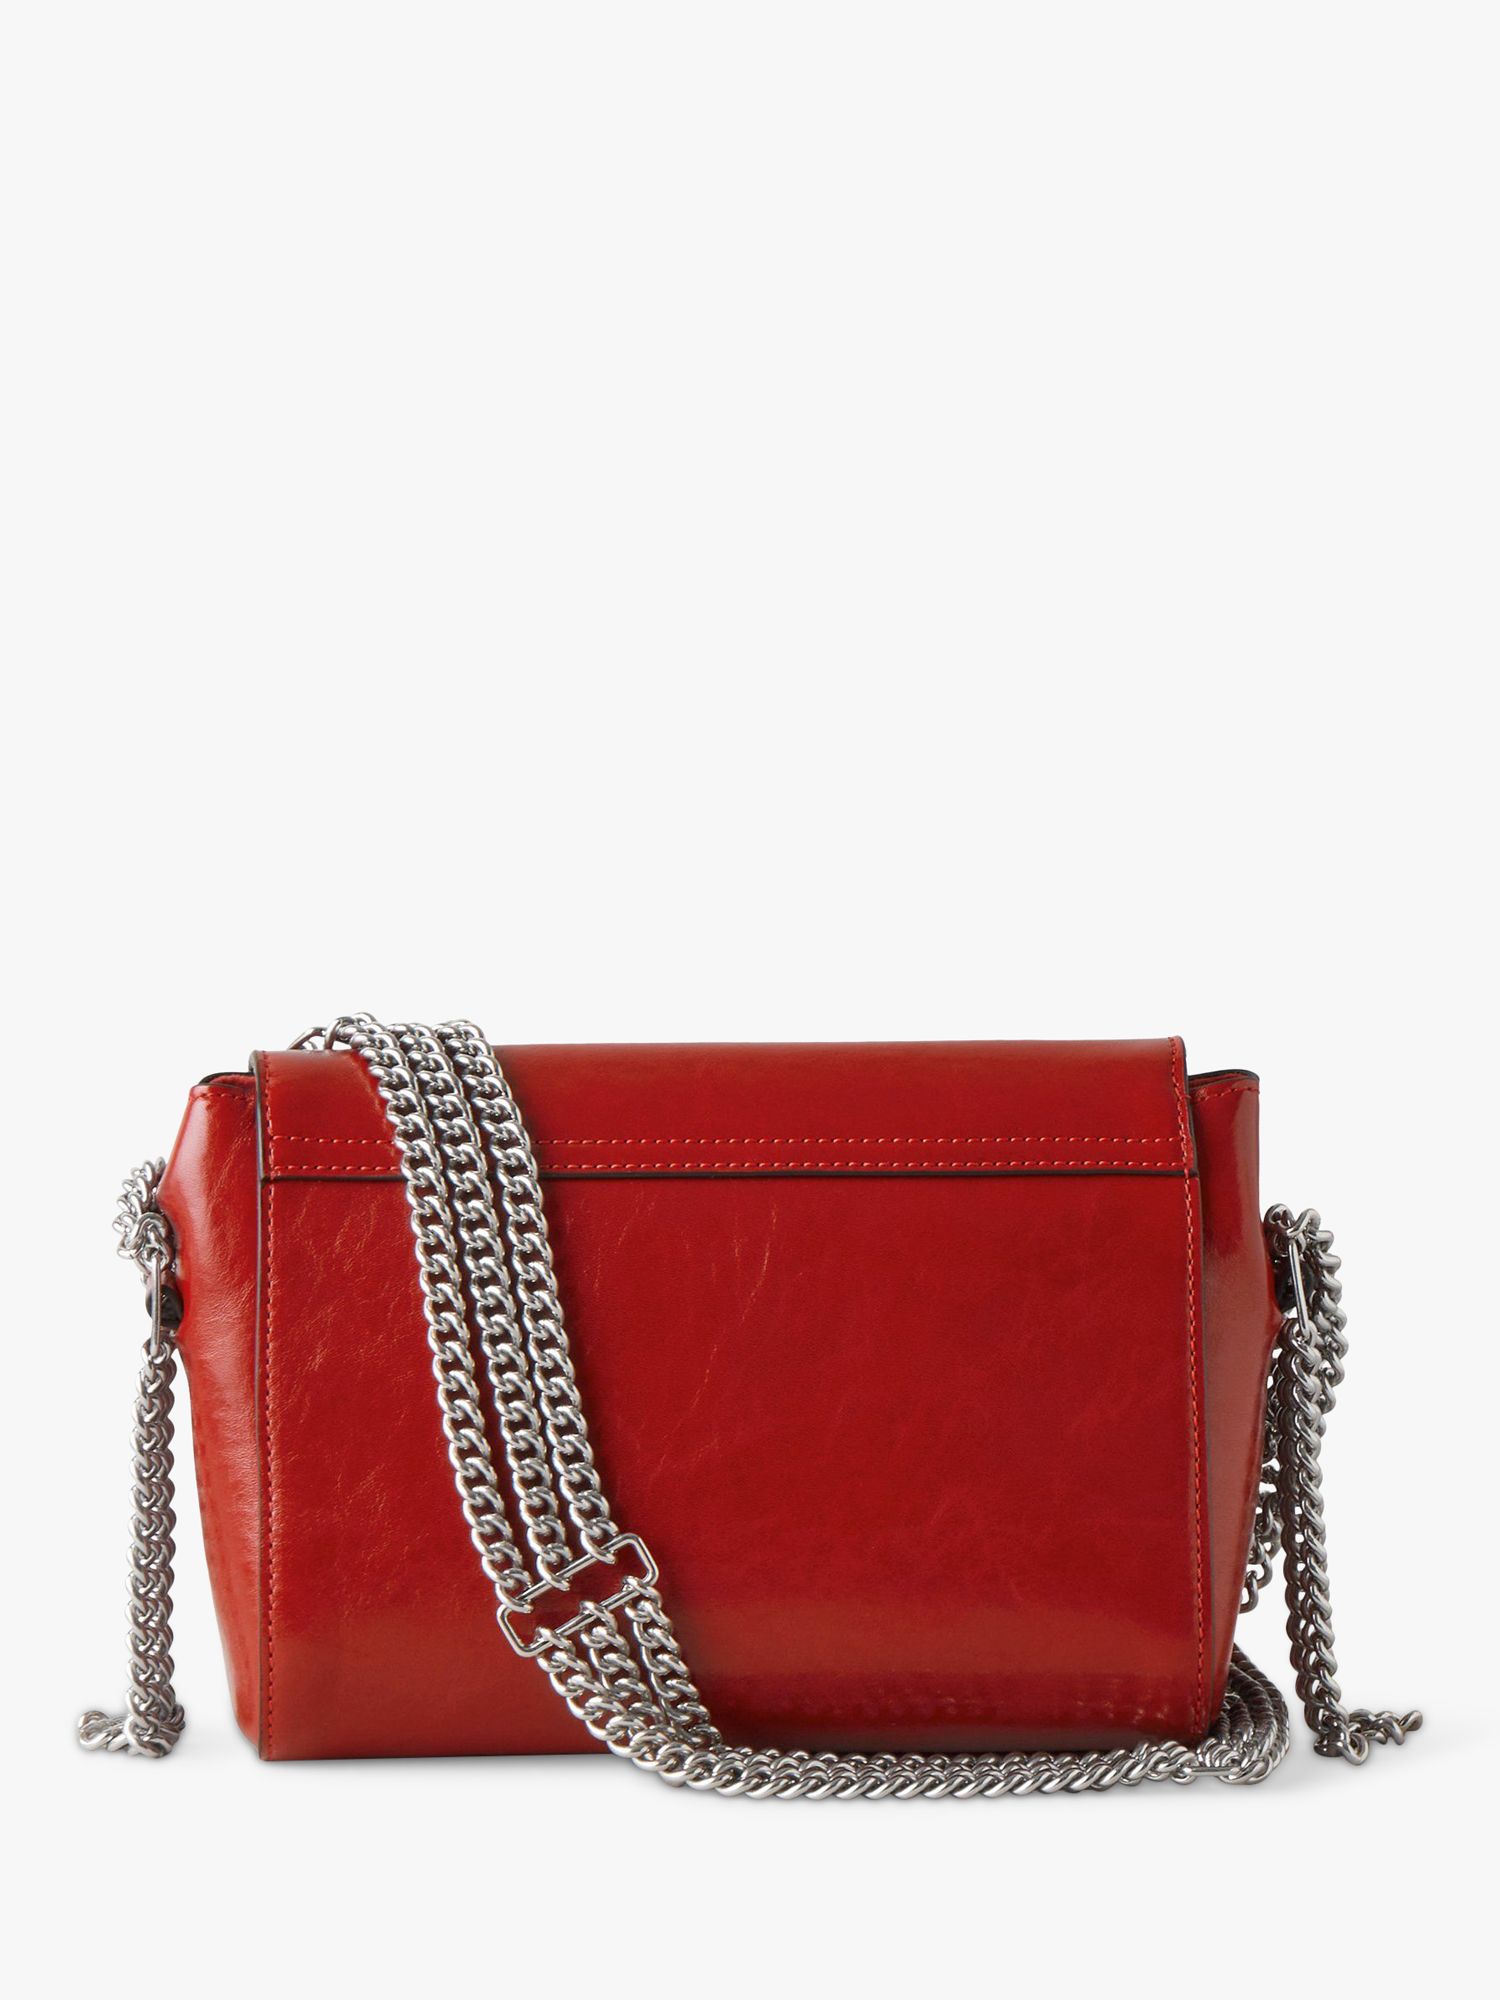 Mulberry Triple Chain Lily Leather Shoulder Bag, Lancaster Red